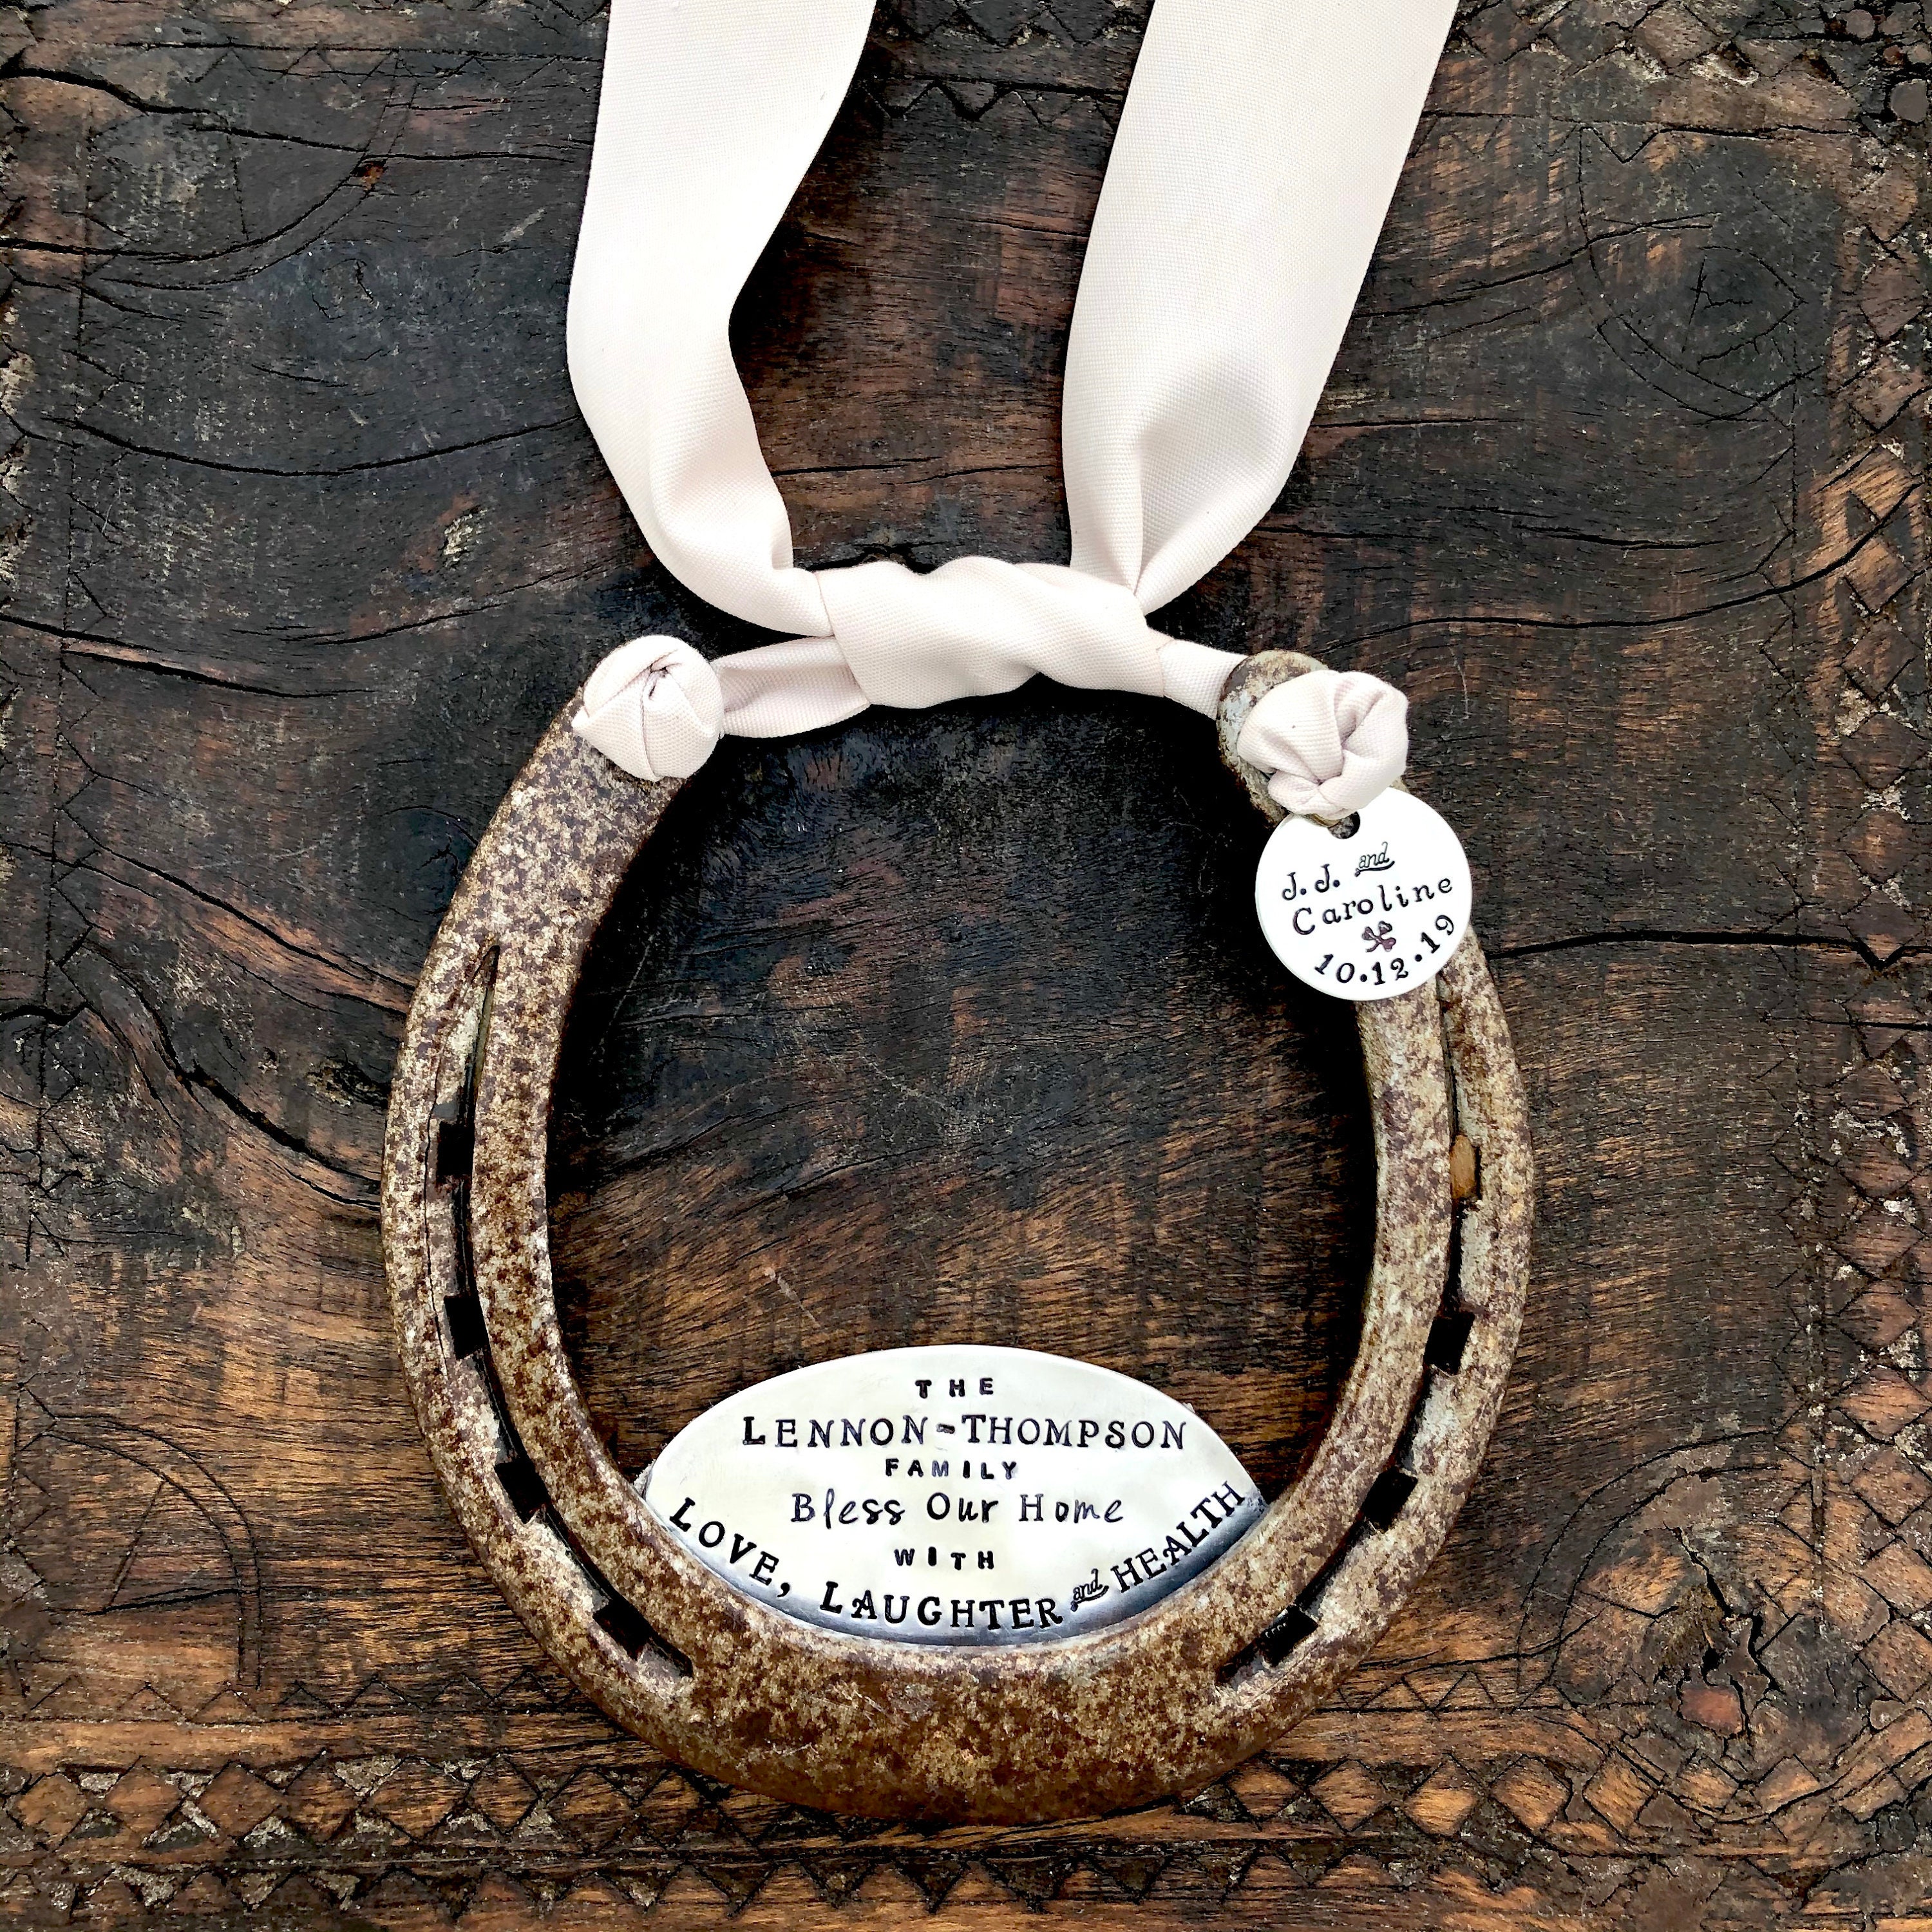 The Love and Luck Horseshoe™ Traditional Symbol. Southern. Rustic Welcome.  Equestrian Decor. Barn Wedding. Equine Style. Housewarming Gift 